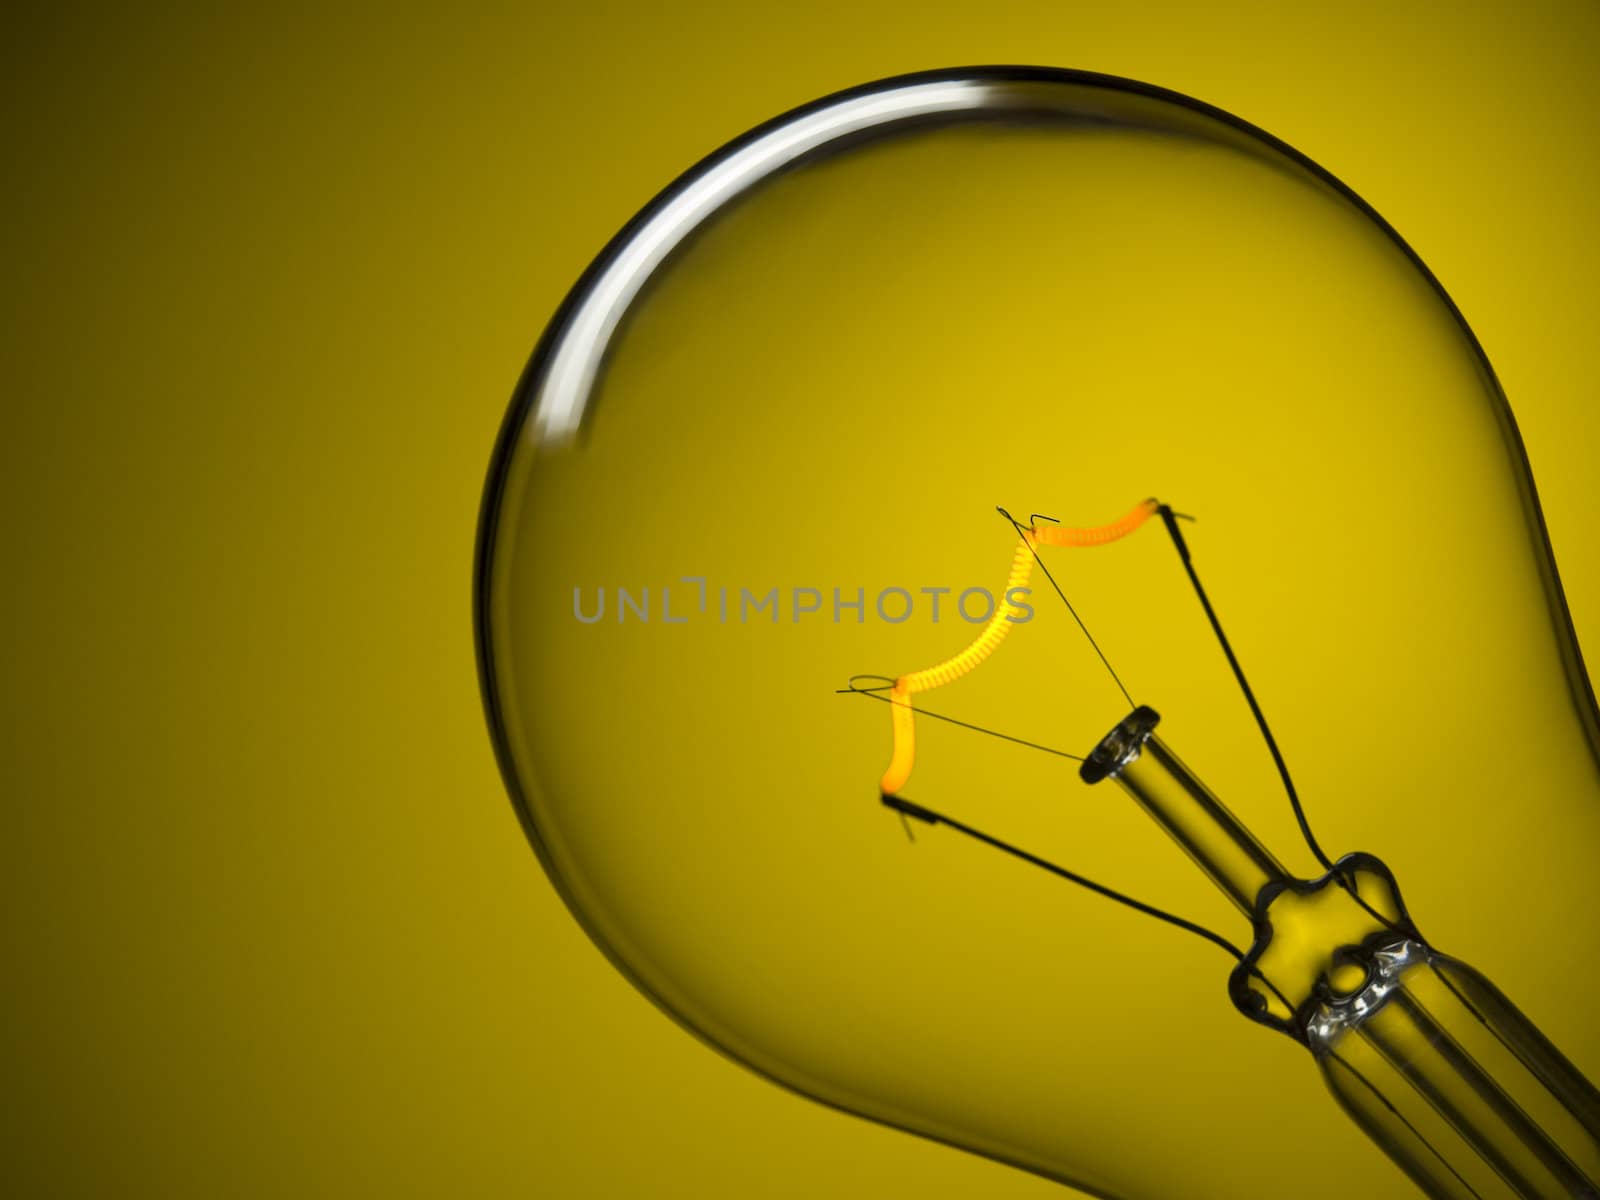 Close up on a turned on light bulb over a yellow background.